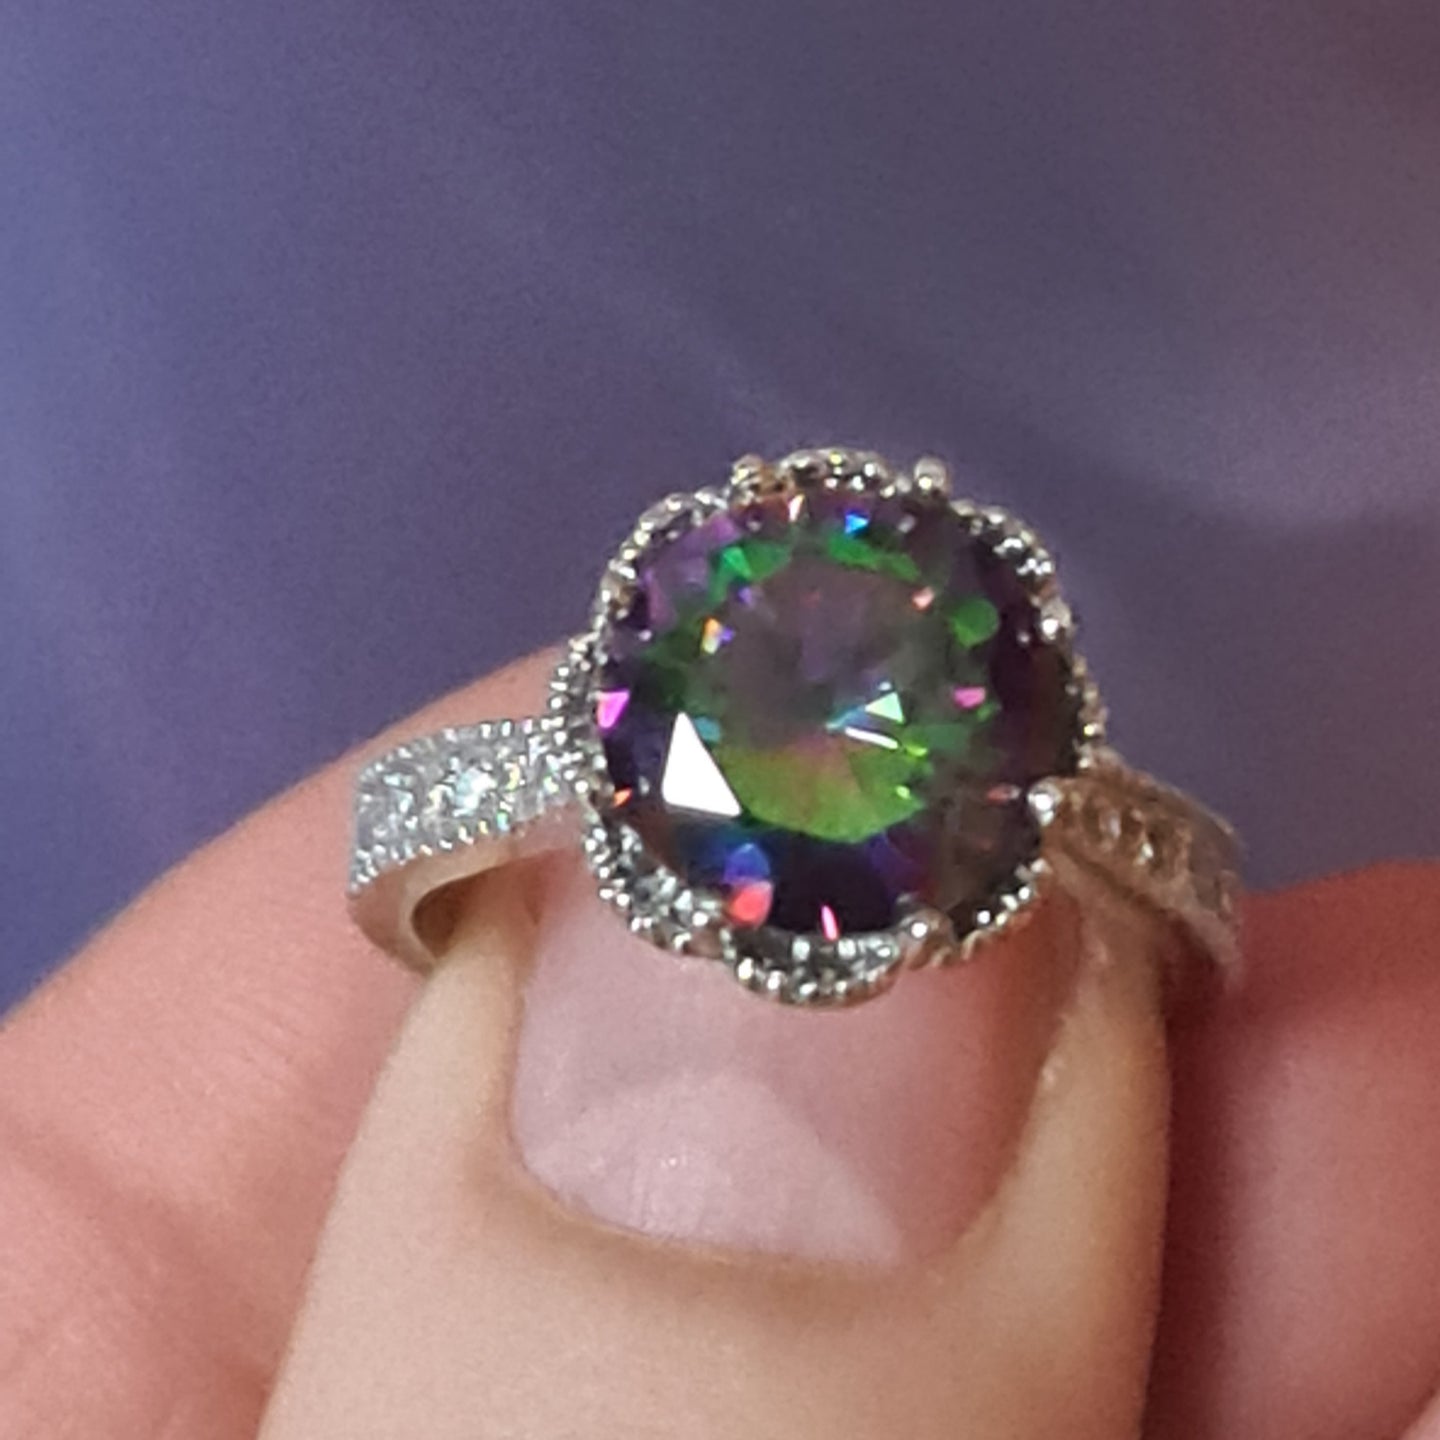 Antique Style ring in Mystic Topaz